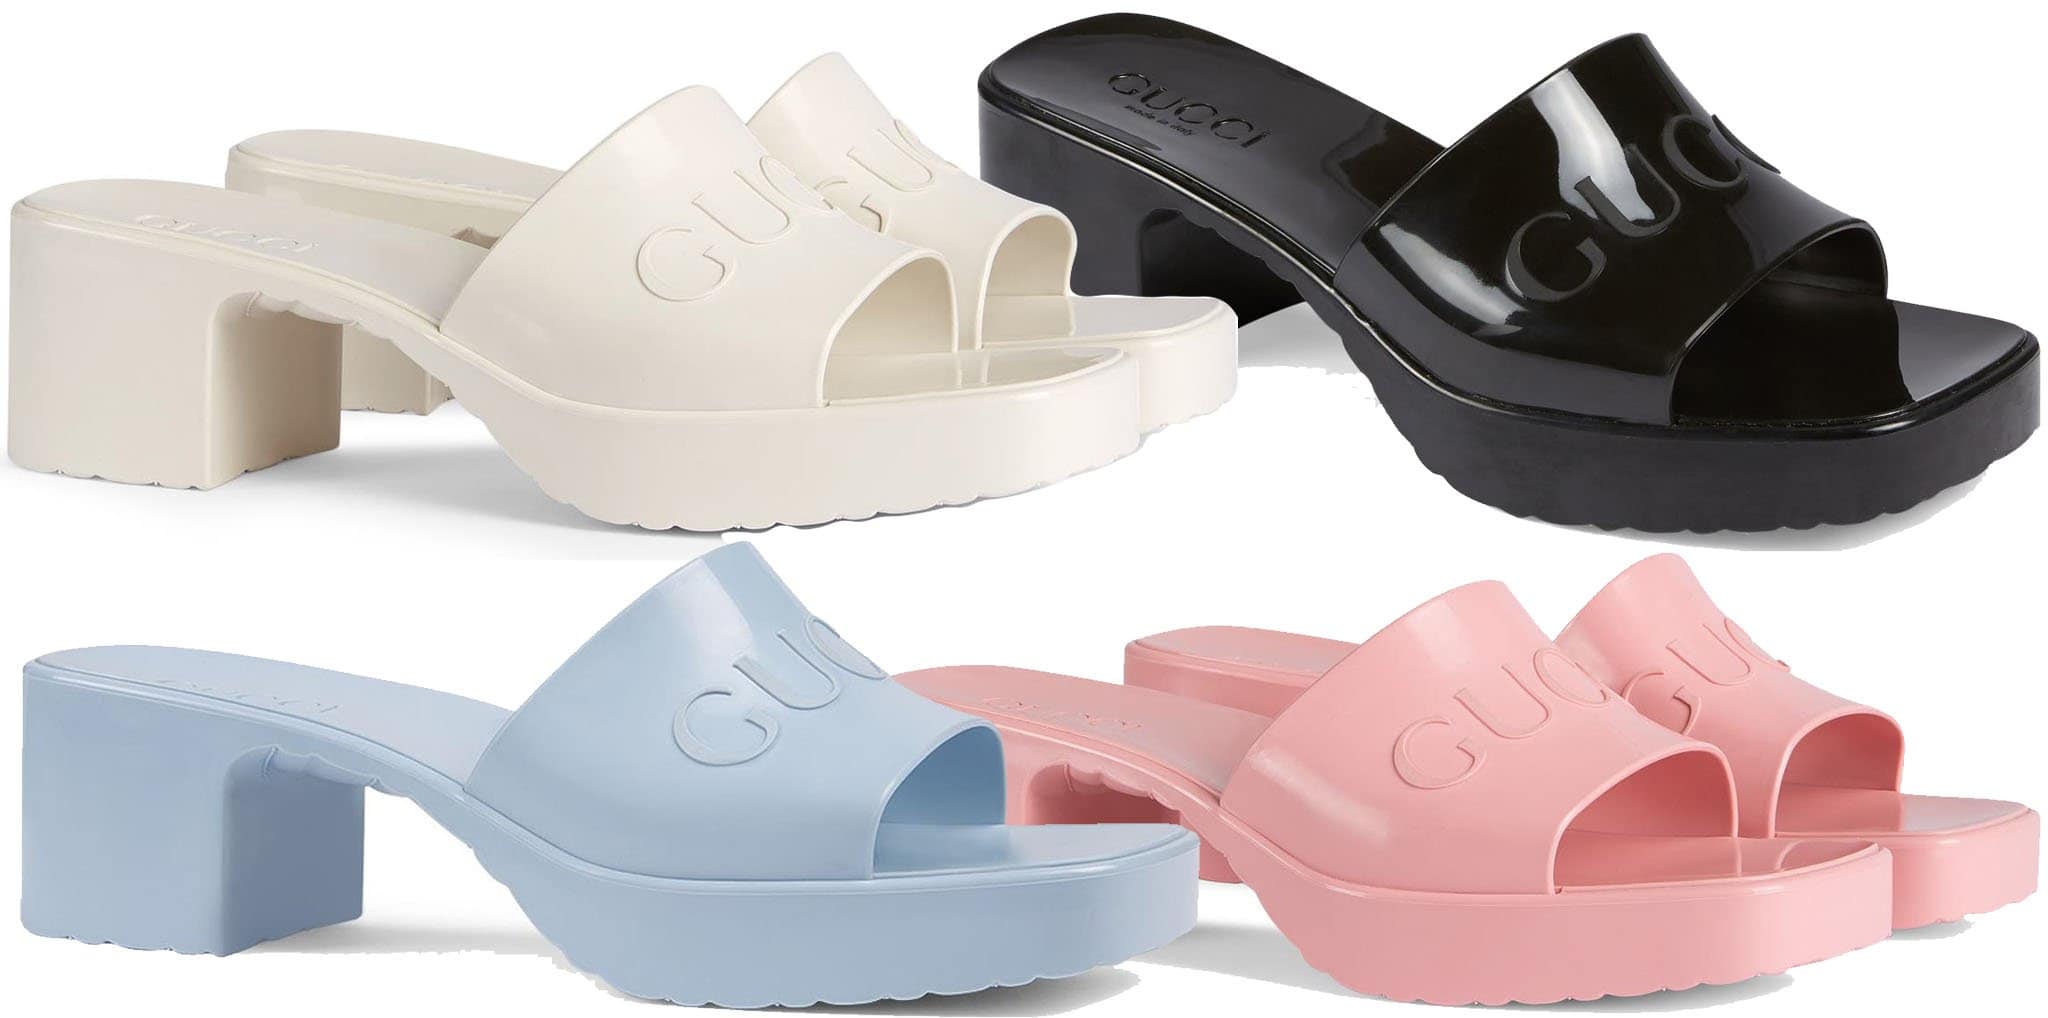 These '90s-style rubber slides have 2.4-inch chunky block heels that can add height to your look